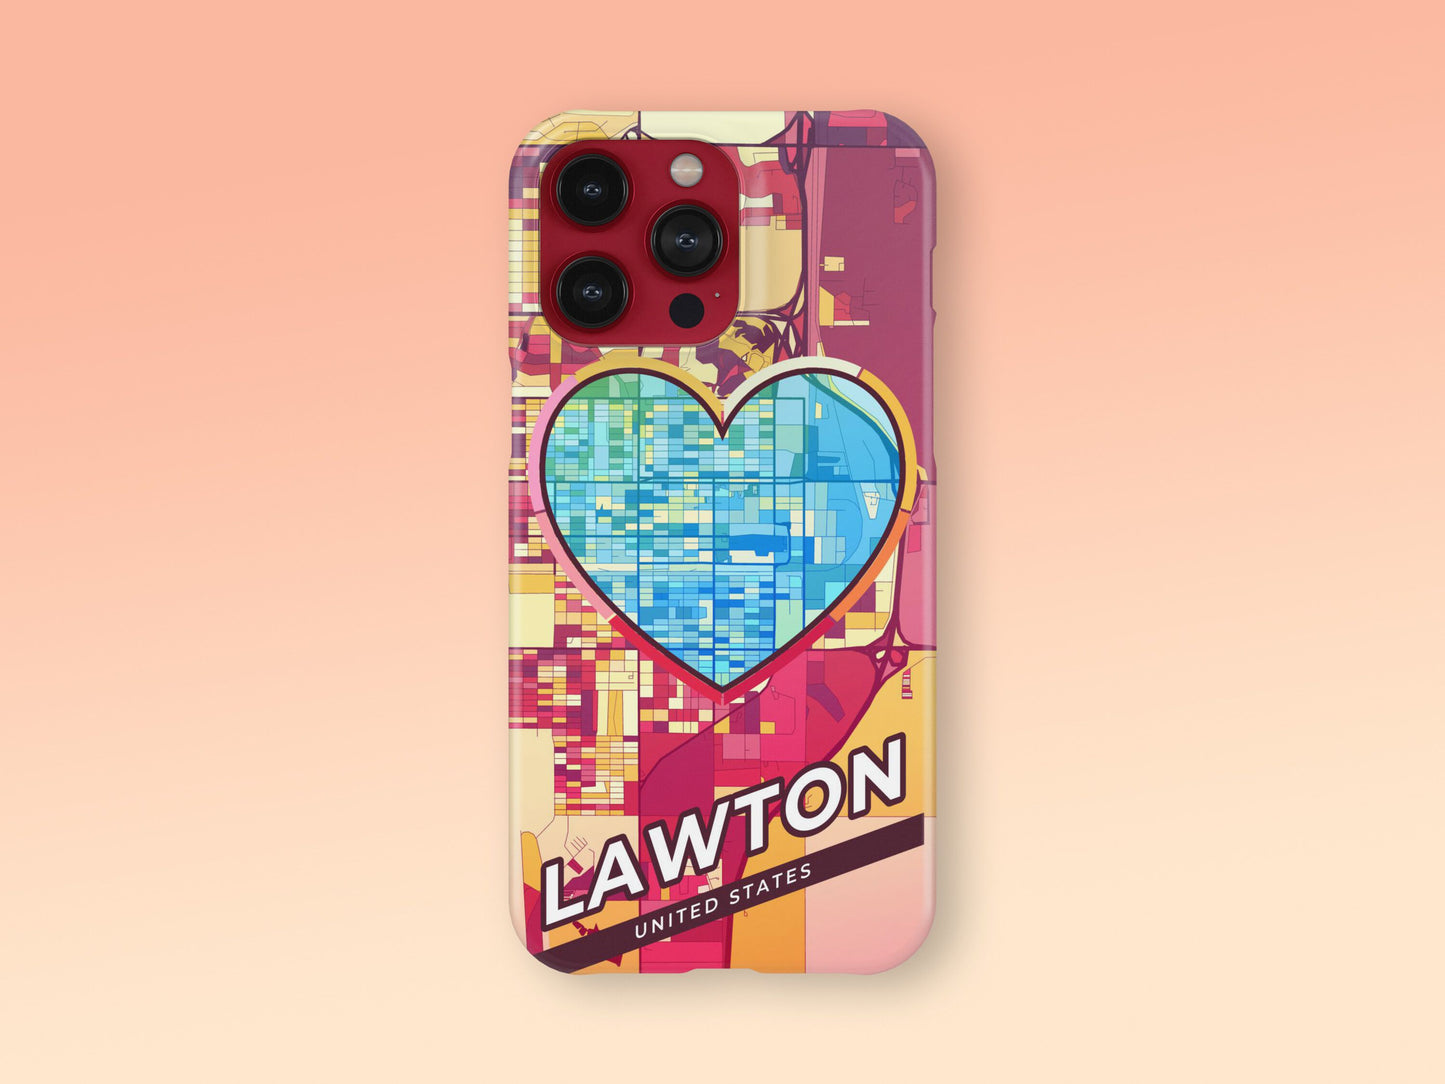 Lawton Oklahoma slim phone case with colorful icon. Birthday, wedding or housewarming gift. Couple match cases. 2